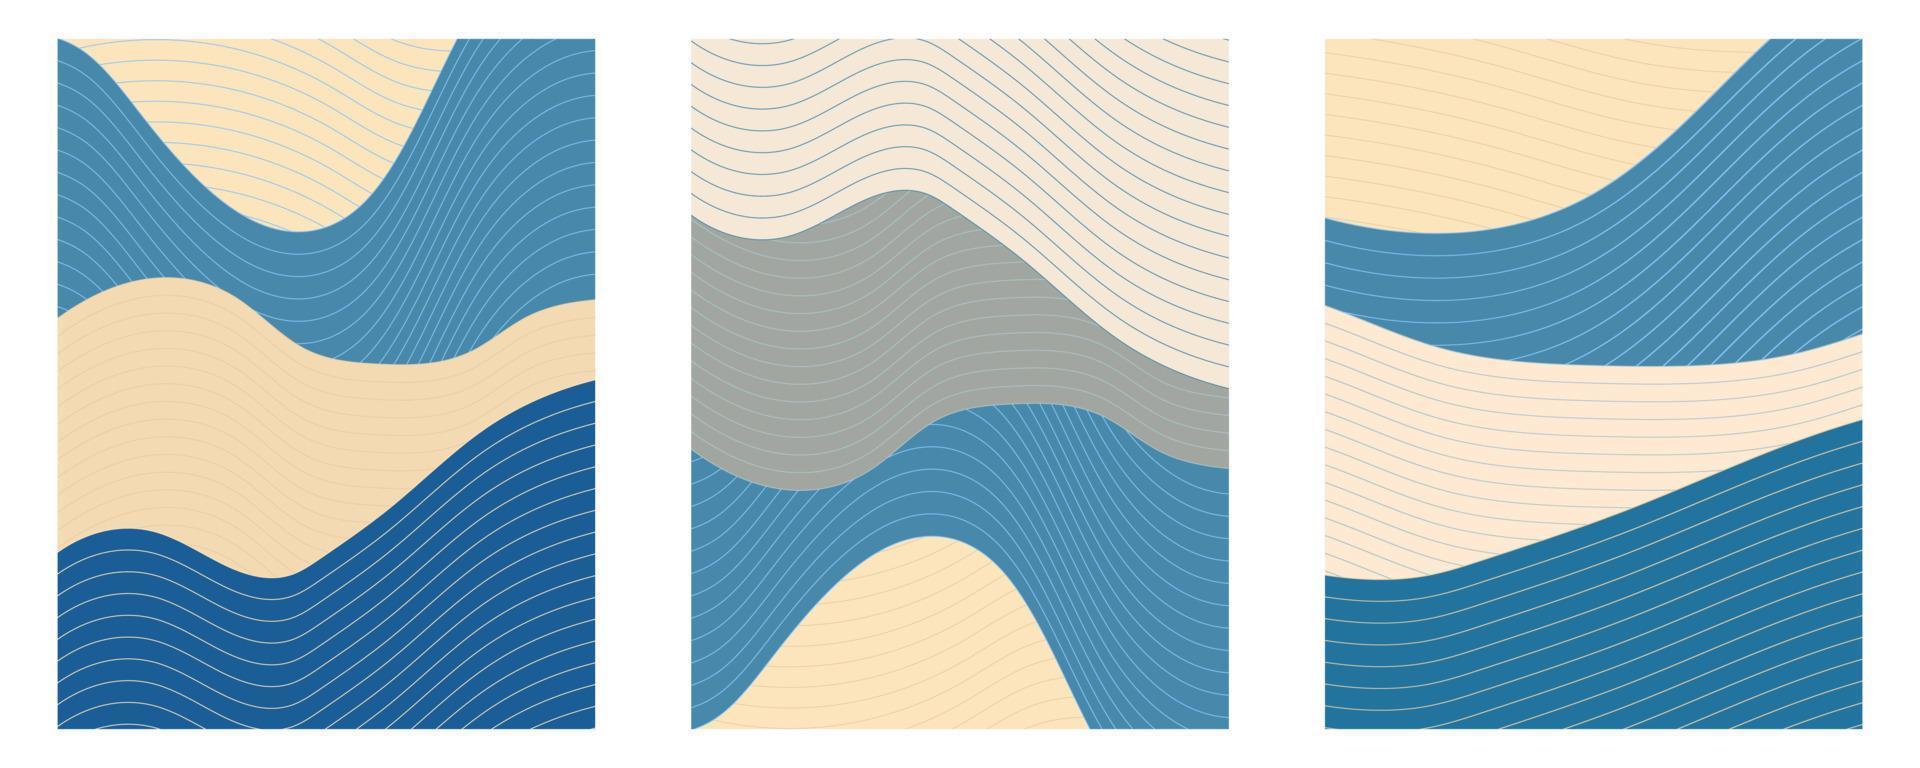 Fluid japanese ocean wave vintage in blue and beige. Set of poster vector designs with line elements.